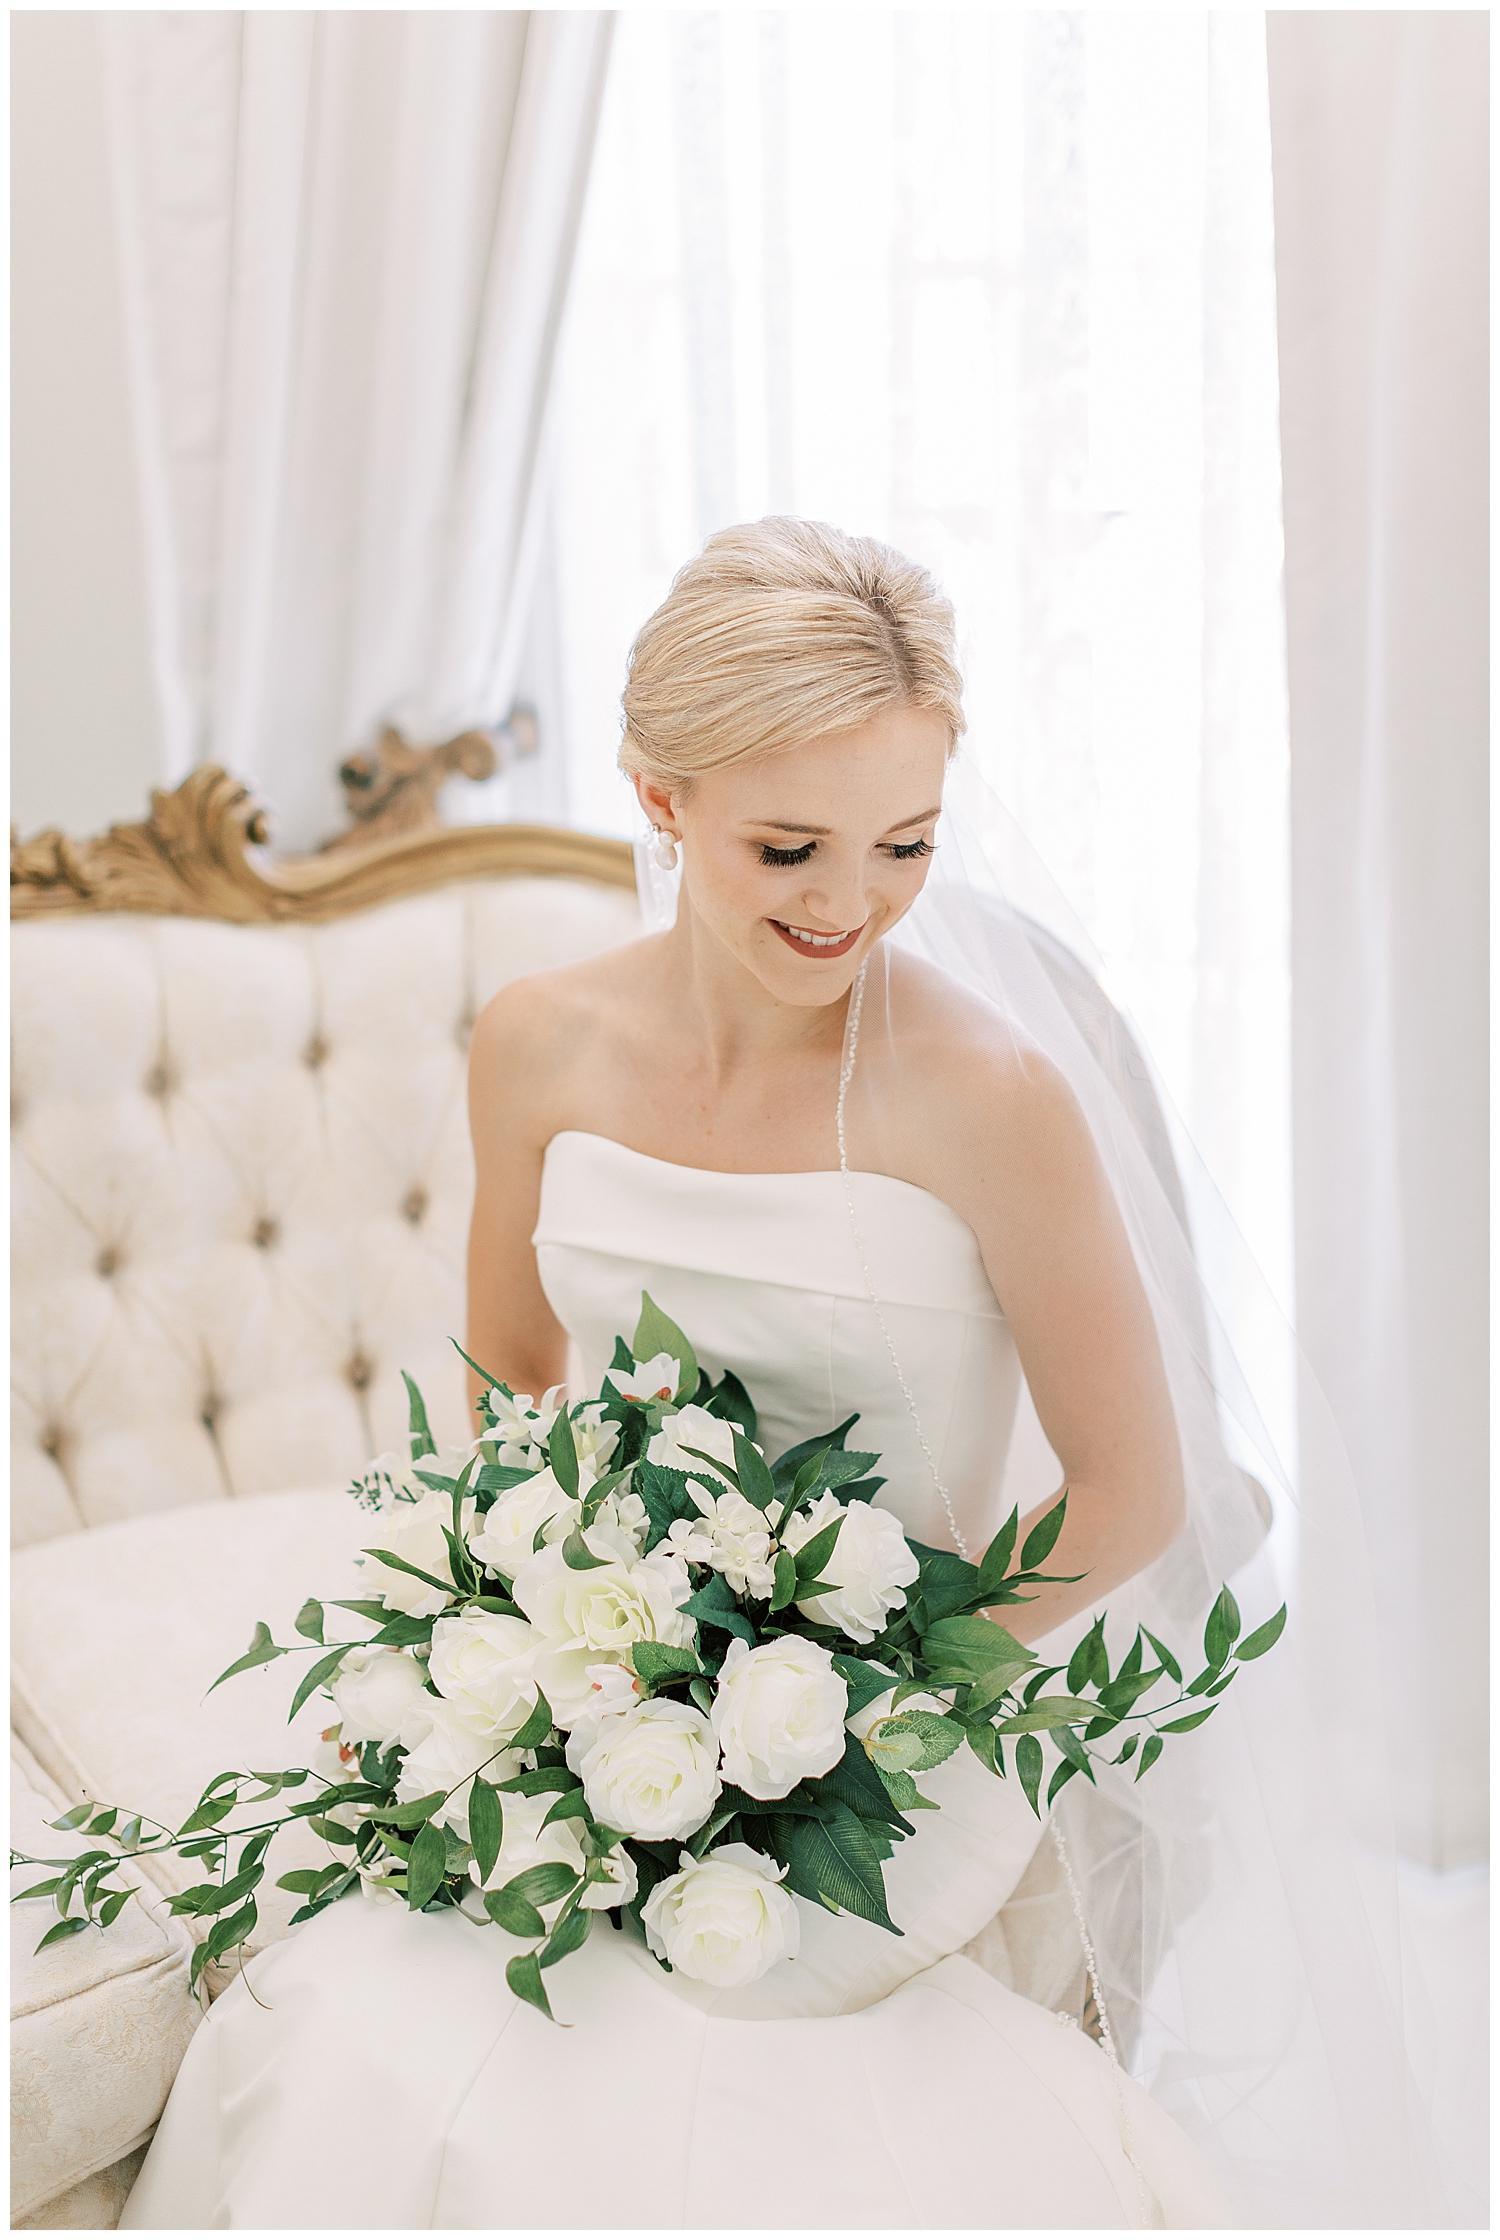 A bride sits on a vintage sofa in a white room.